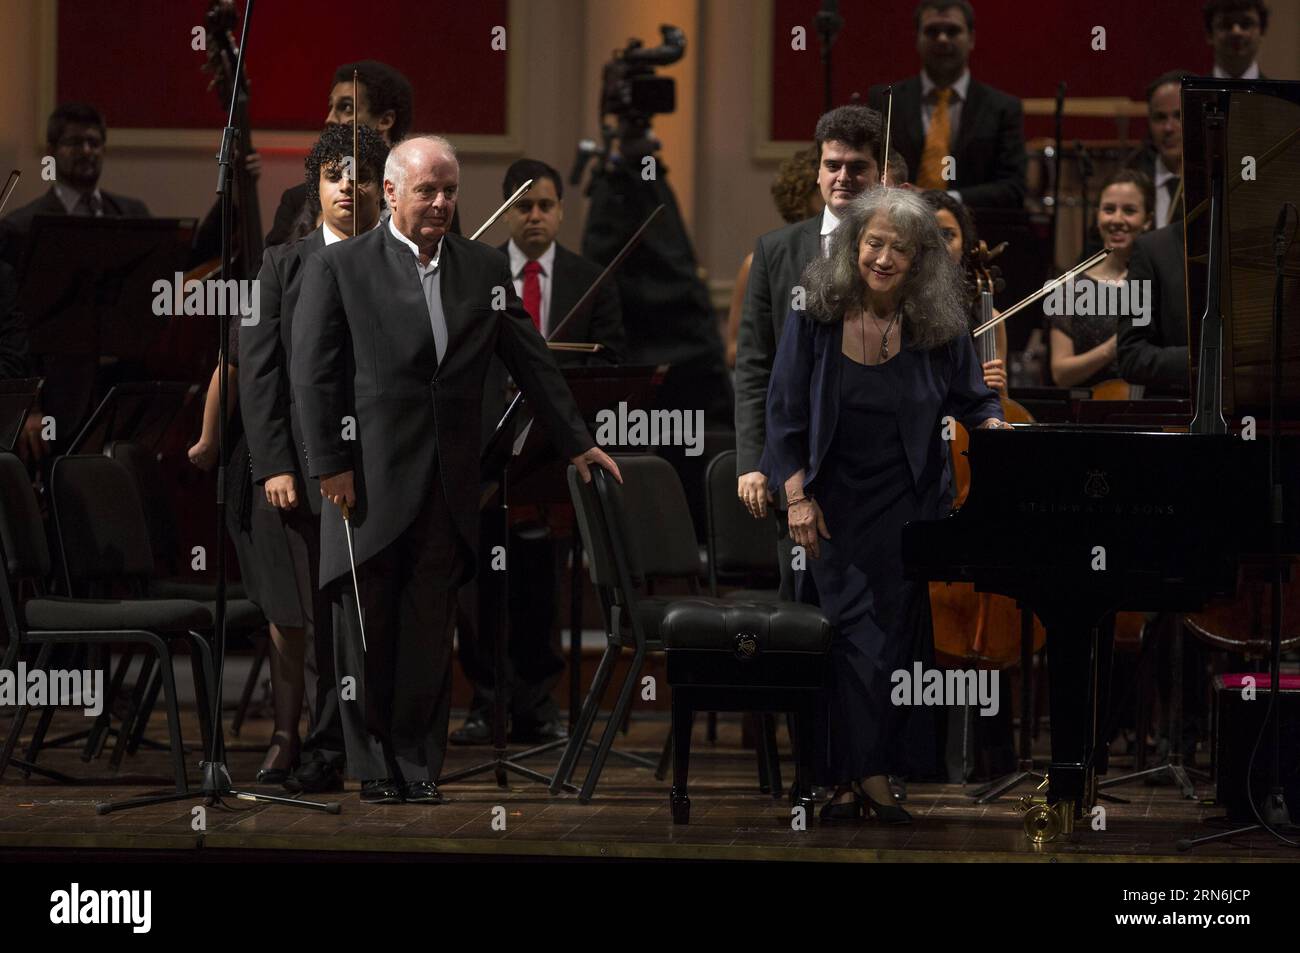 BUENOS AIRES, July 29, 2015 -- Argentinean Musician and orchestra conductor Daniel Barenboim (L) and pianist Martha Argerich (R) respond to the applause during a concert held with the West-Eastern Divan Orchestra at the Colon Theater, in Buenos Aires, capital of Argentina, July 29, 2015. ) (jp) ARGENTINA-BUENOS AIRES-MUSIC-CONCERT MARTINxZABALA PUBLICATIONxNOTxINxCHN   Buenos Aires July 29 2015 Argentinean Musician and Orchestra Conductor Daniel Barenboim l and Pianist Martha Argerich r respond to The Applause during a Concert Hero With The WEST Eastern Divan Orchestra AT The Colon Theatre in Stock Photo